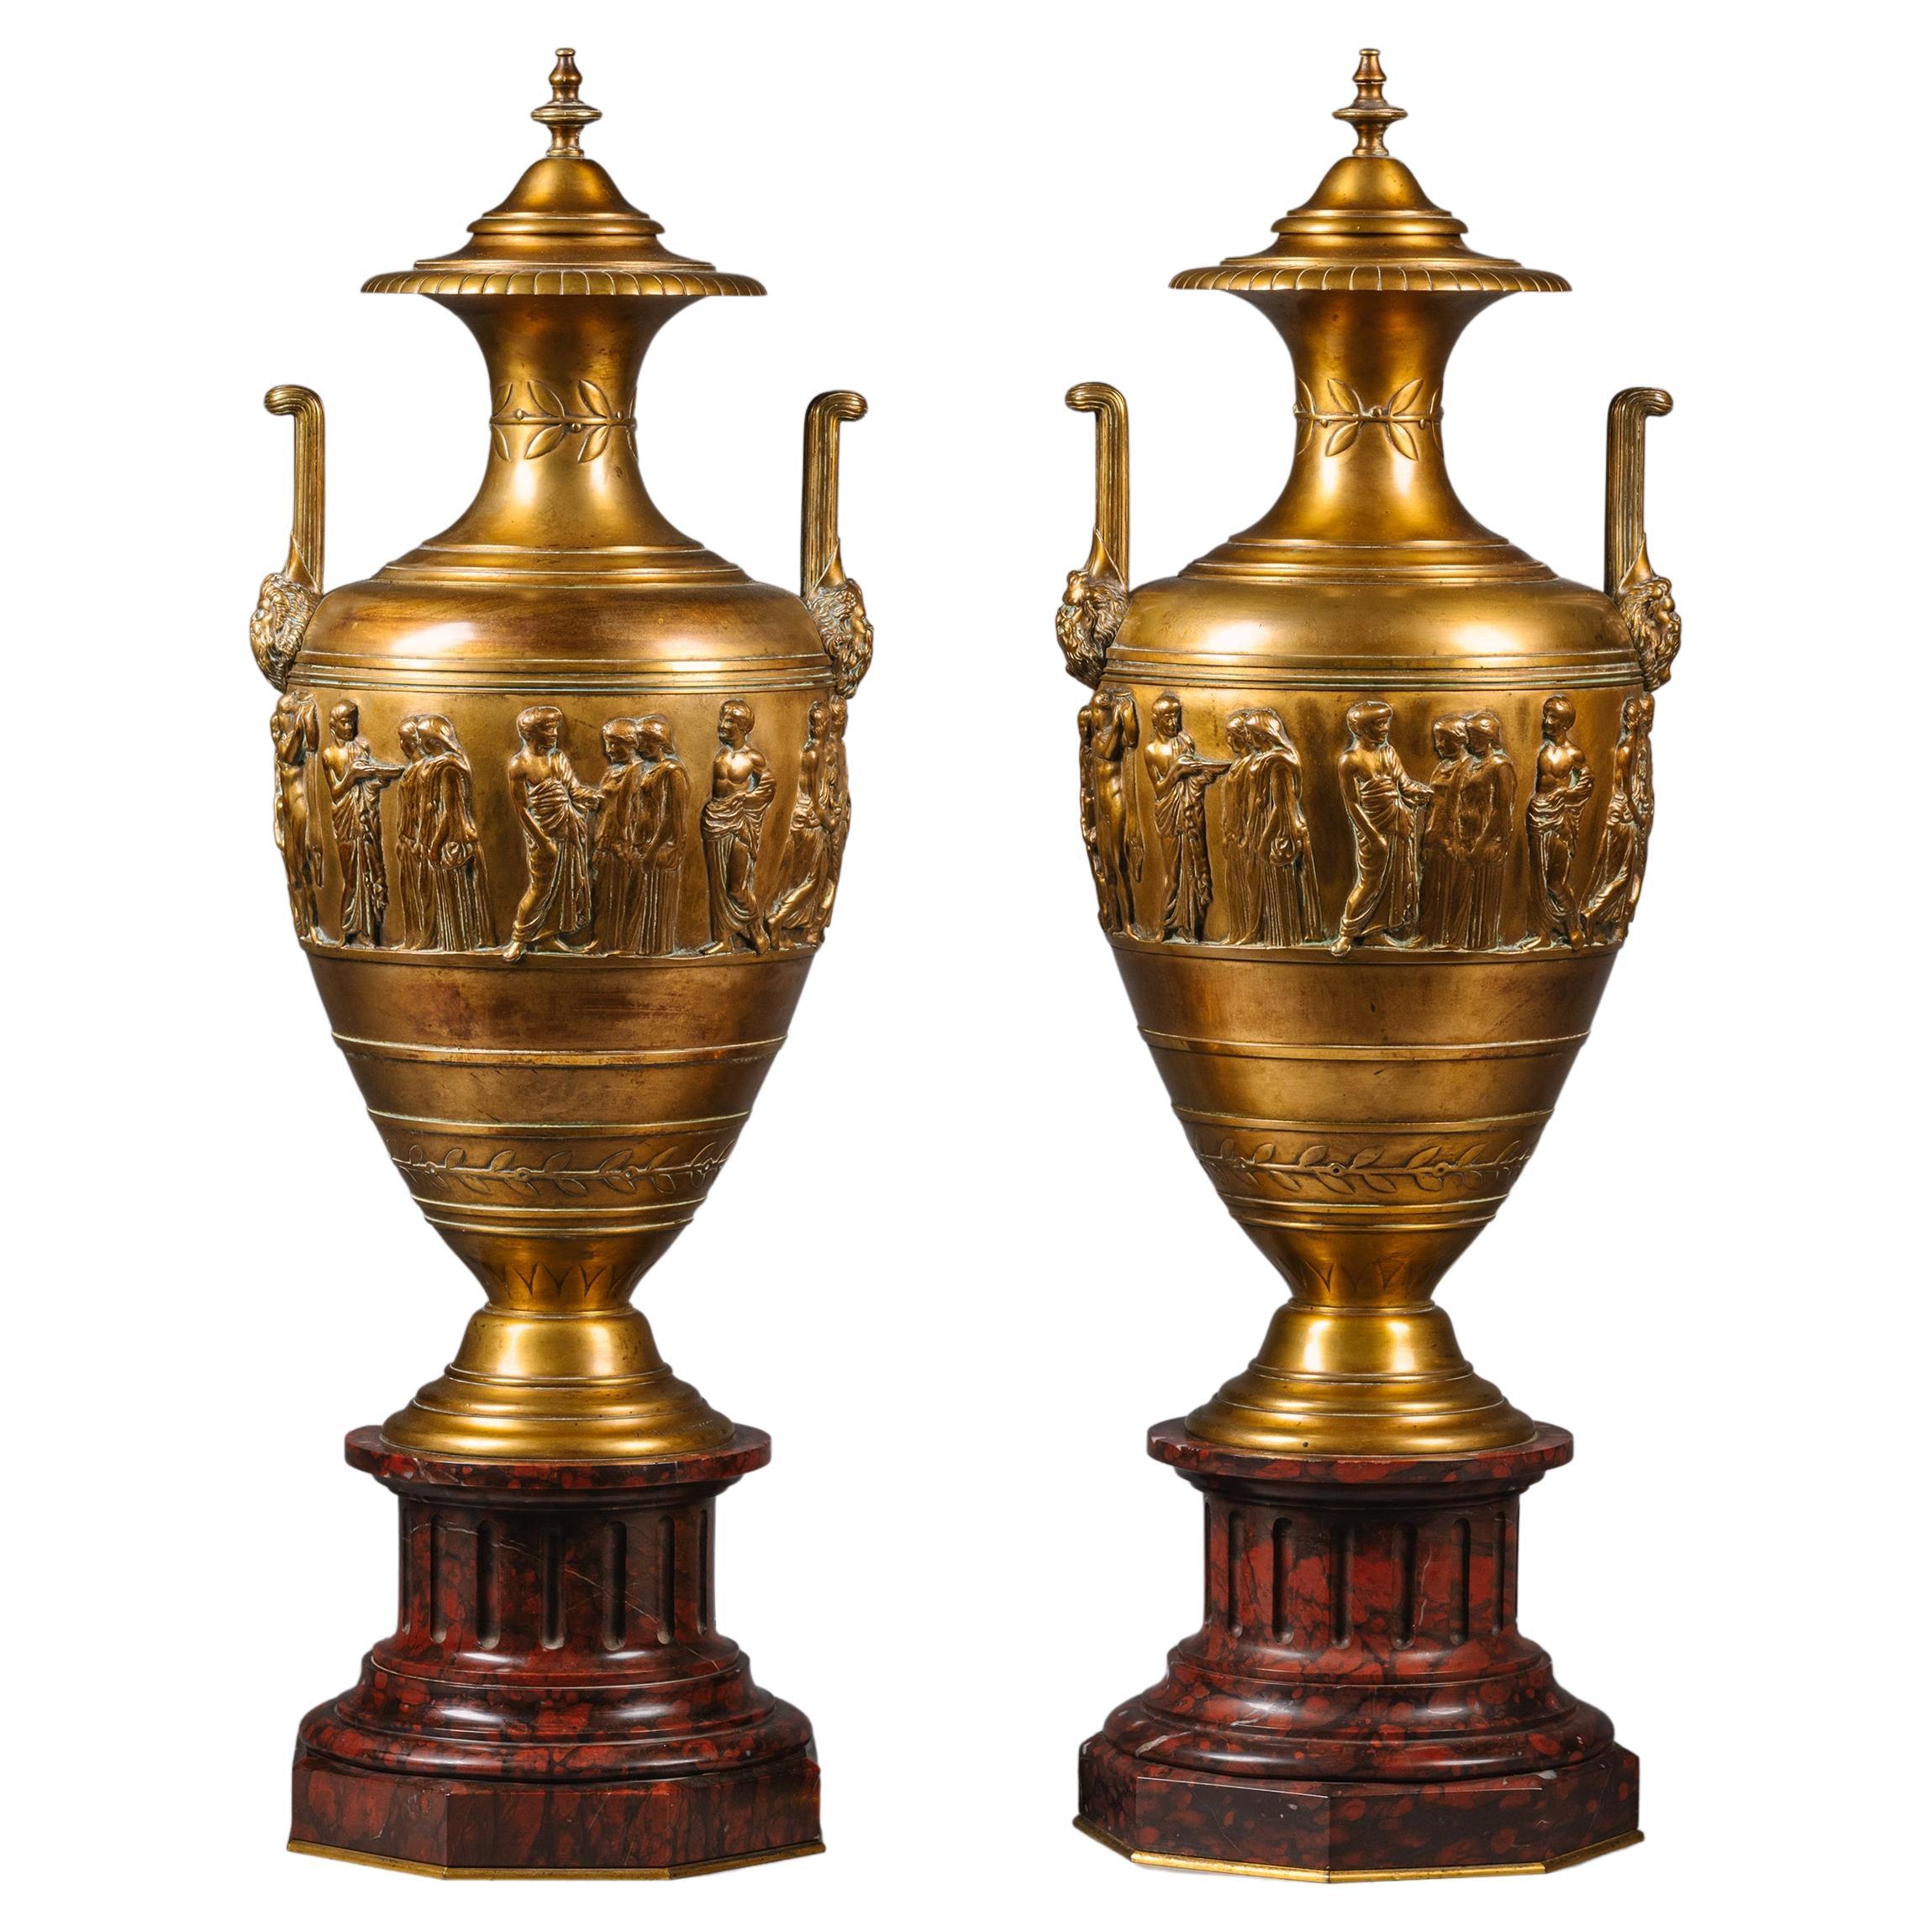 Pair of Gilt-Bronze and Rouge Griotte Marble Vases and Covers